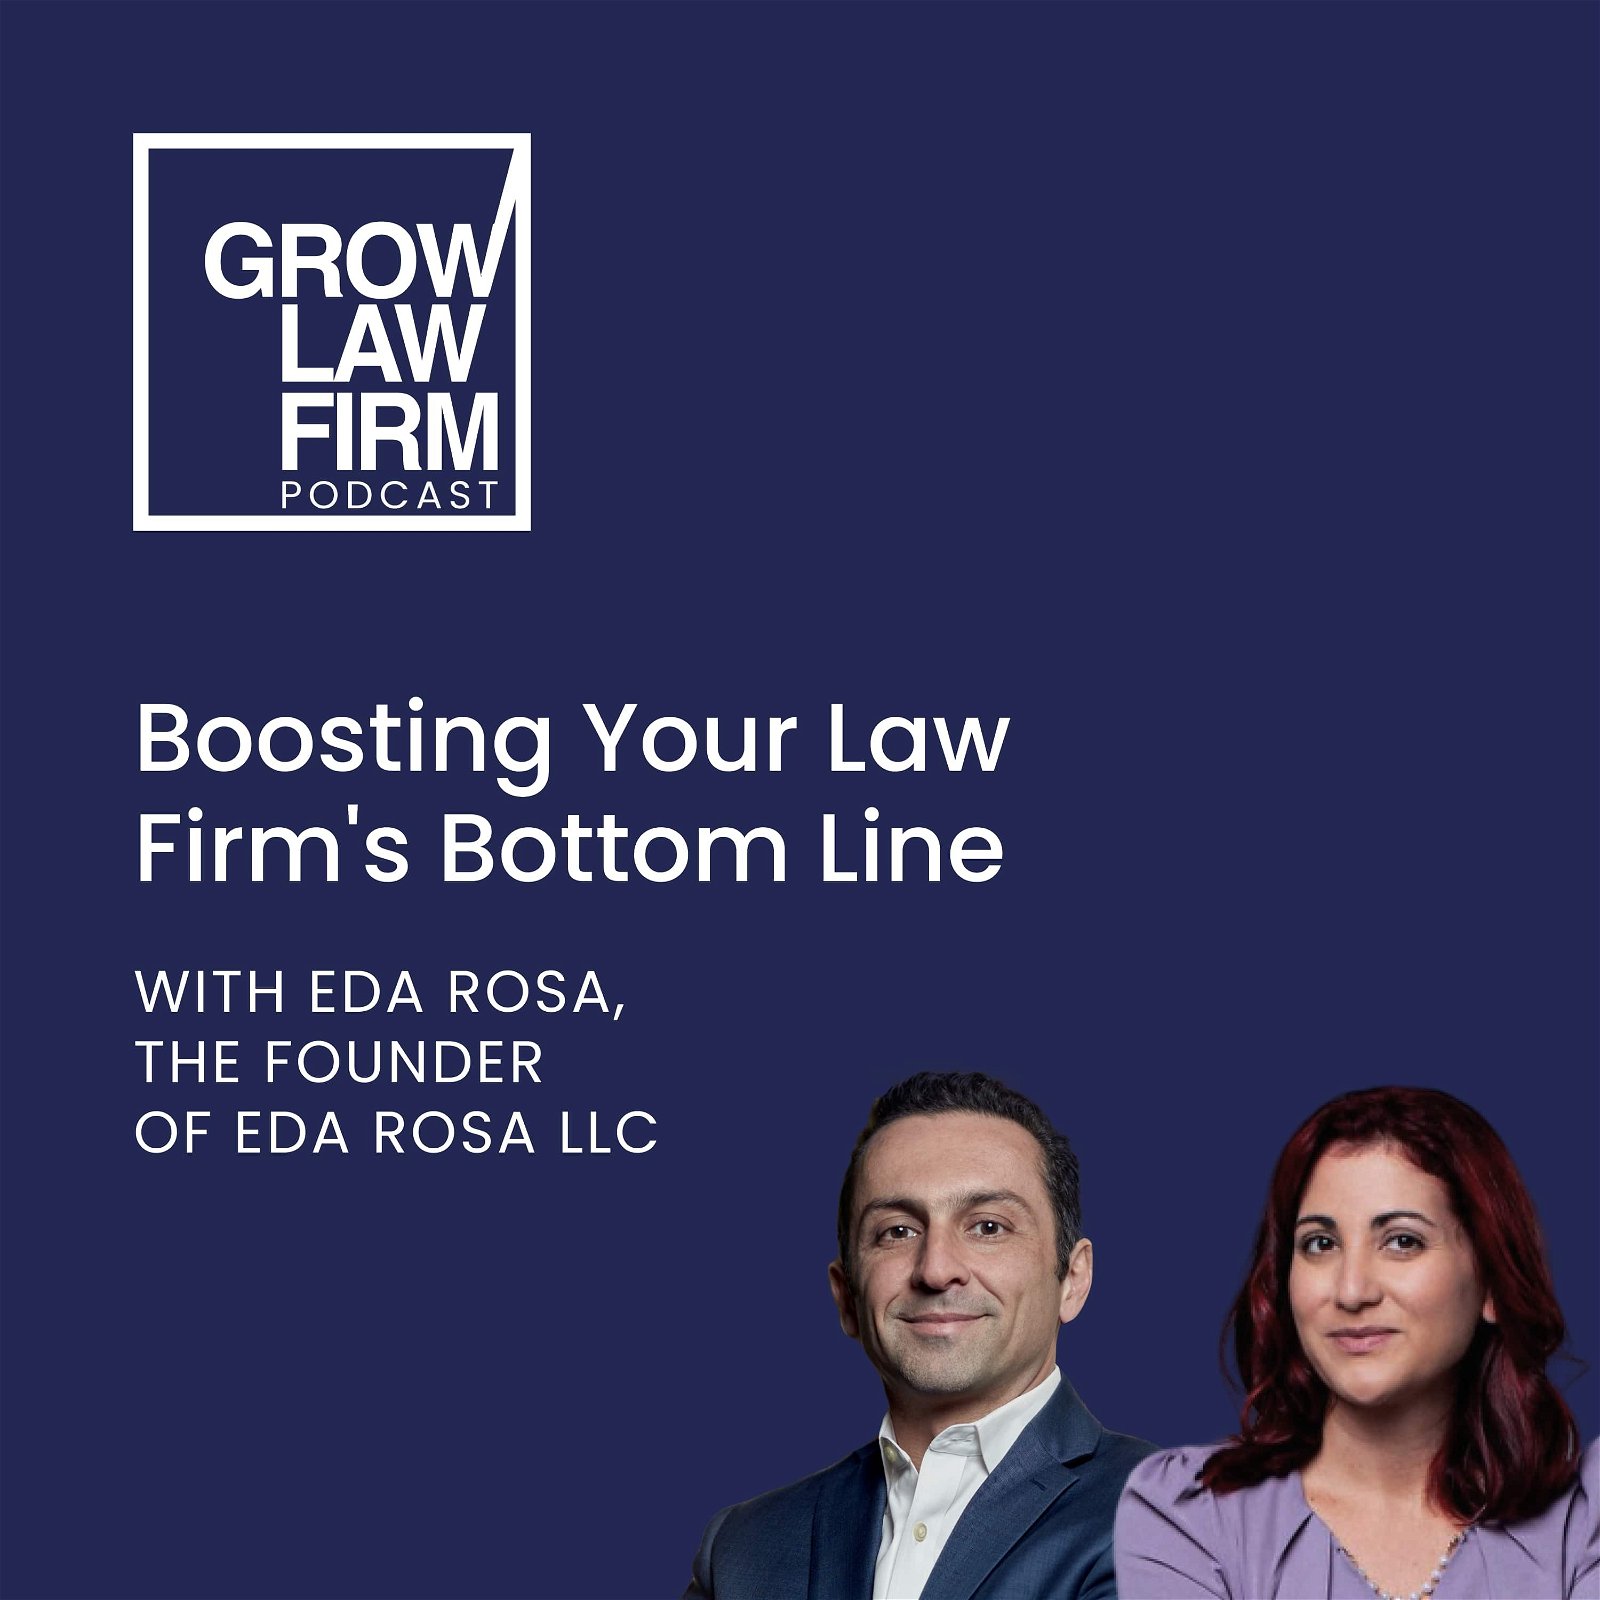 Boosting Your Law Firm's Bottom Line with Eda Rosa, the Founder of Eda Rosa LLC